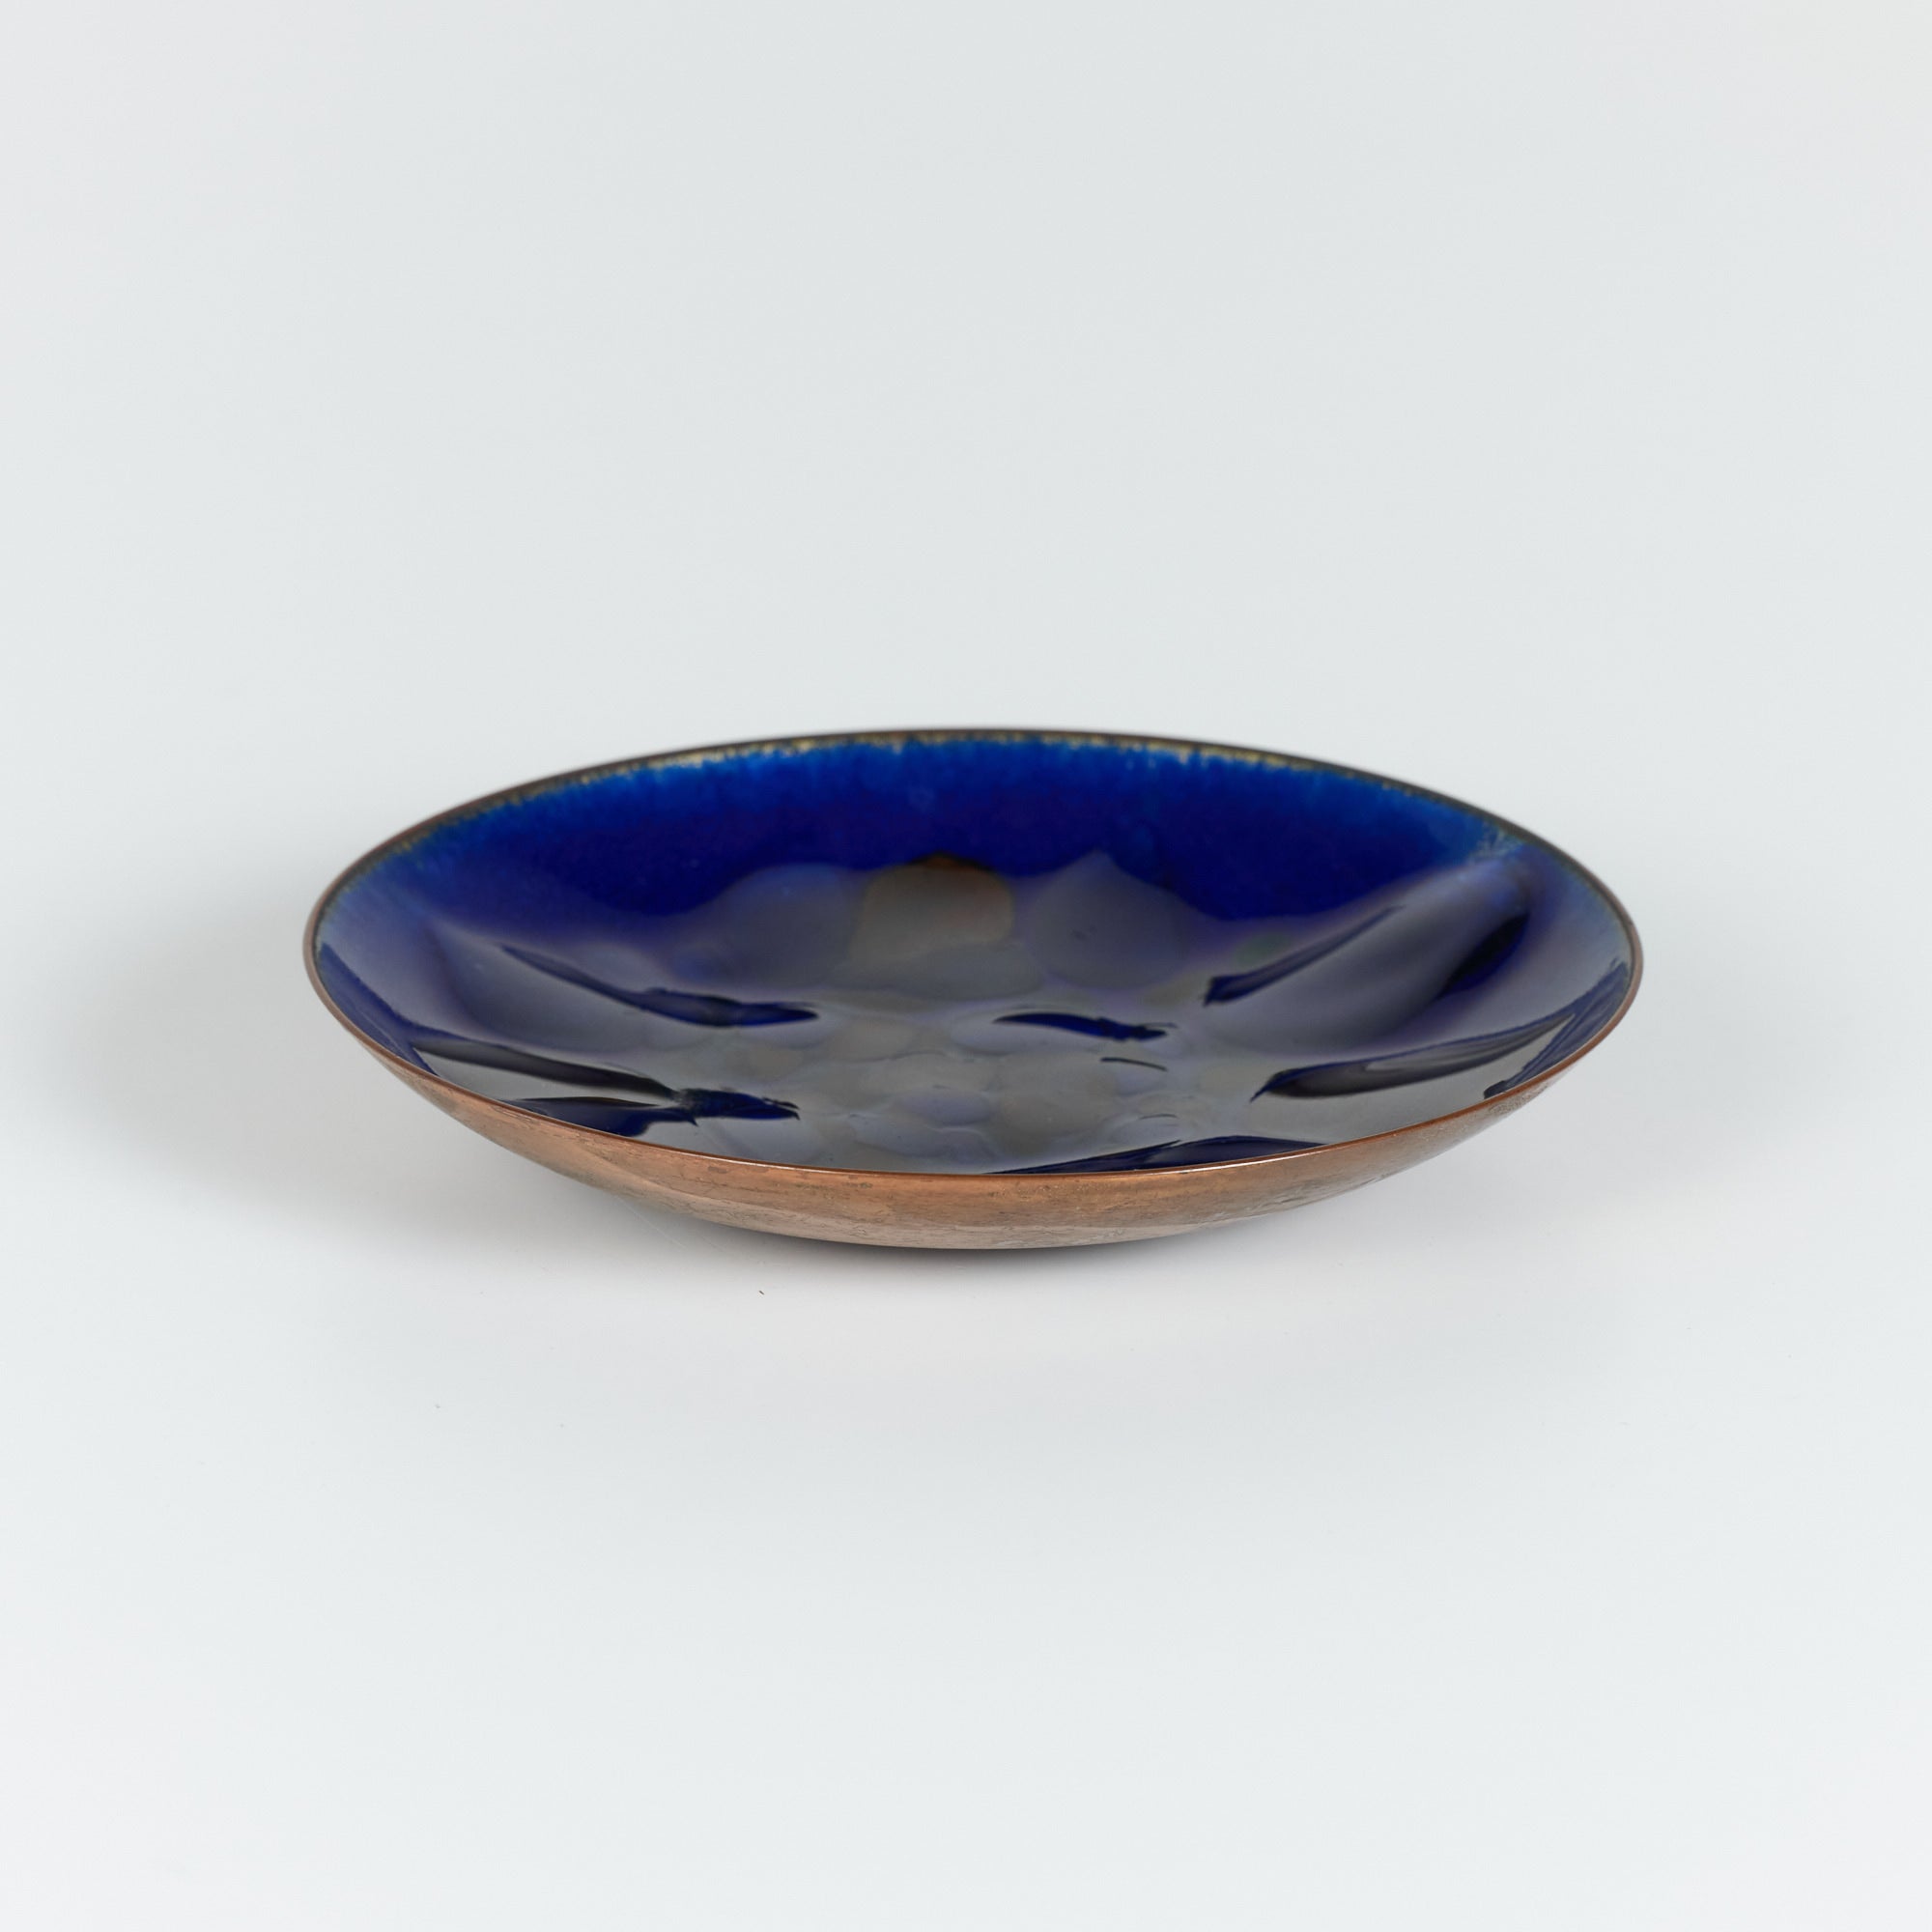 Copper Royal Blue Enameled Plate By Win Ng